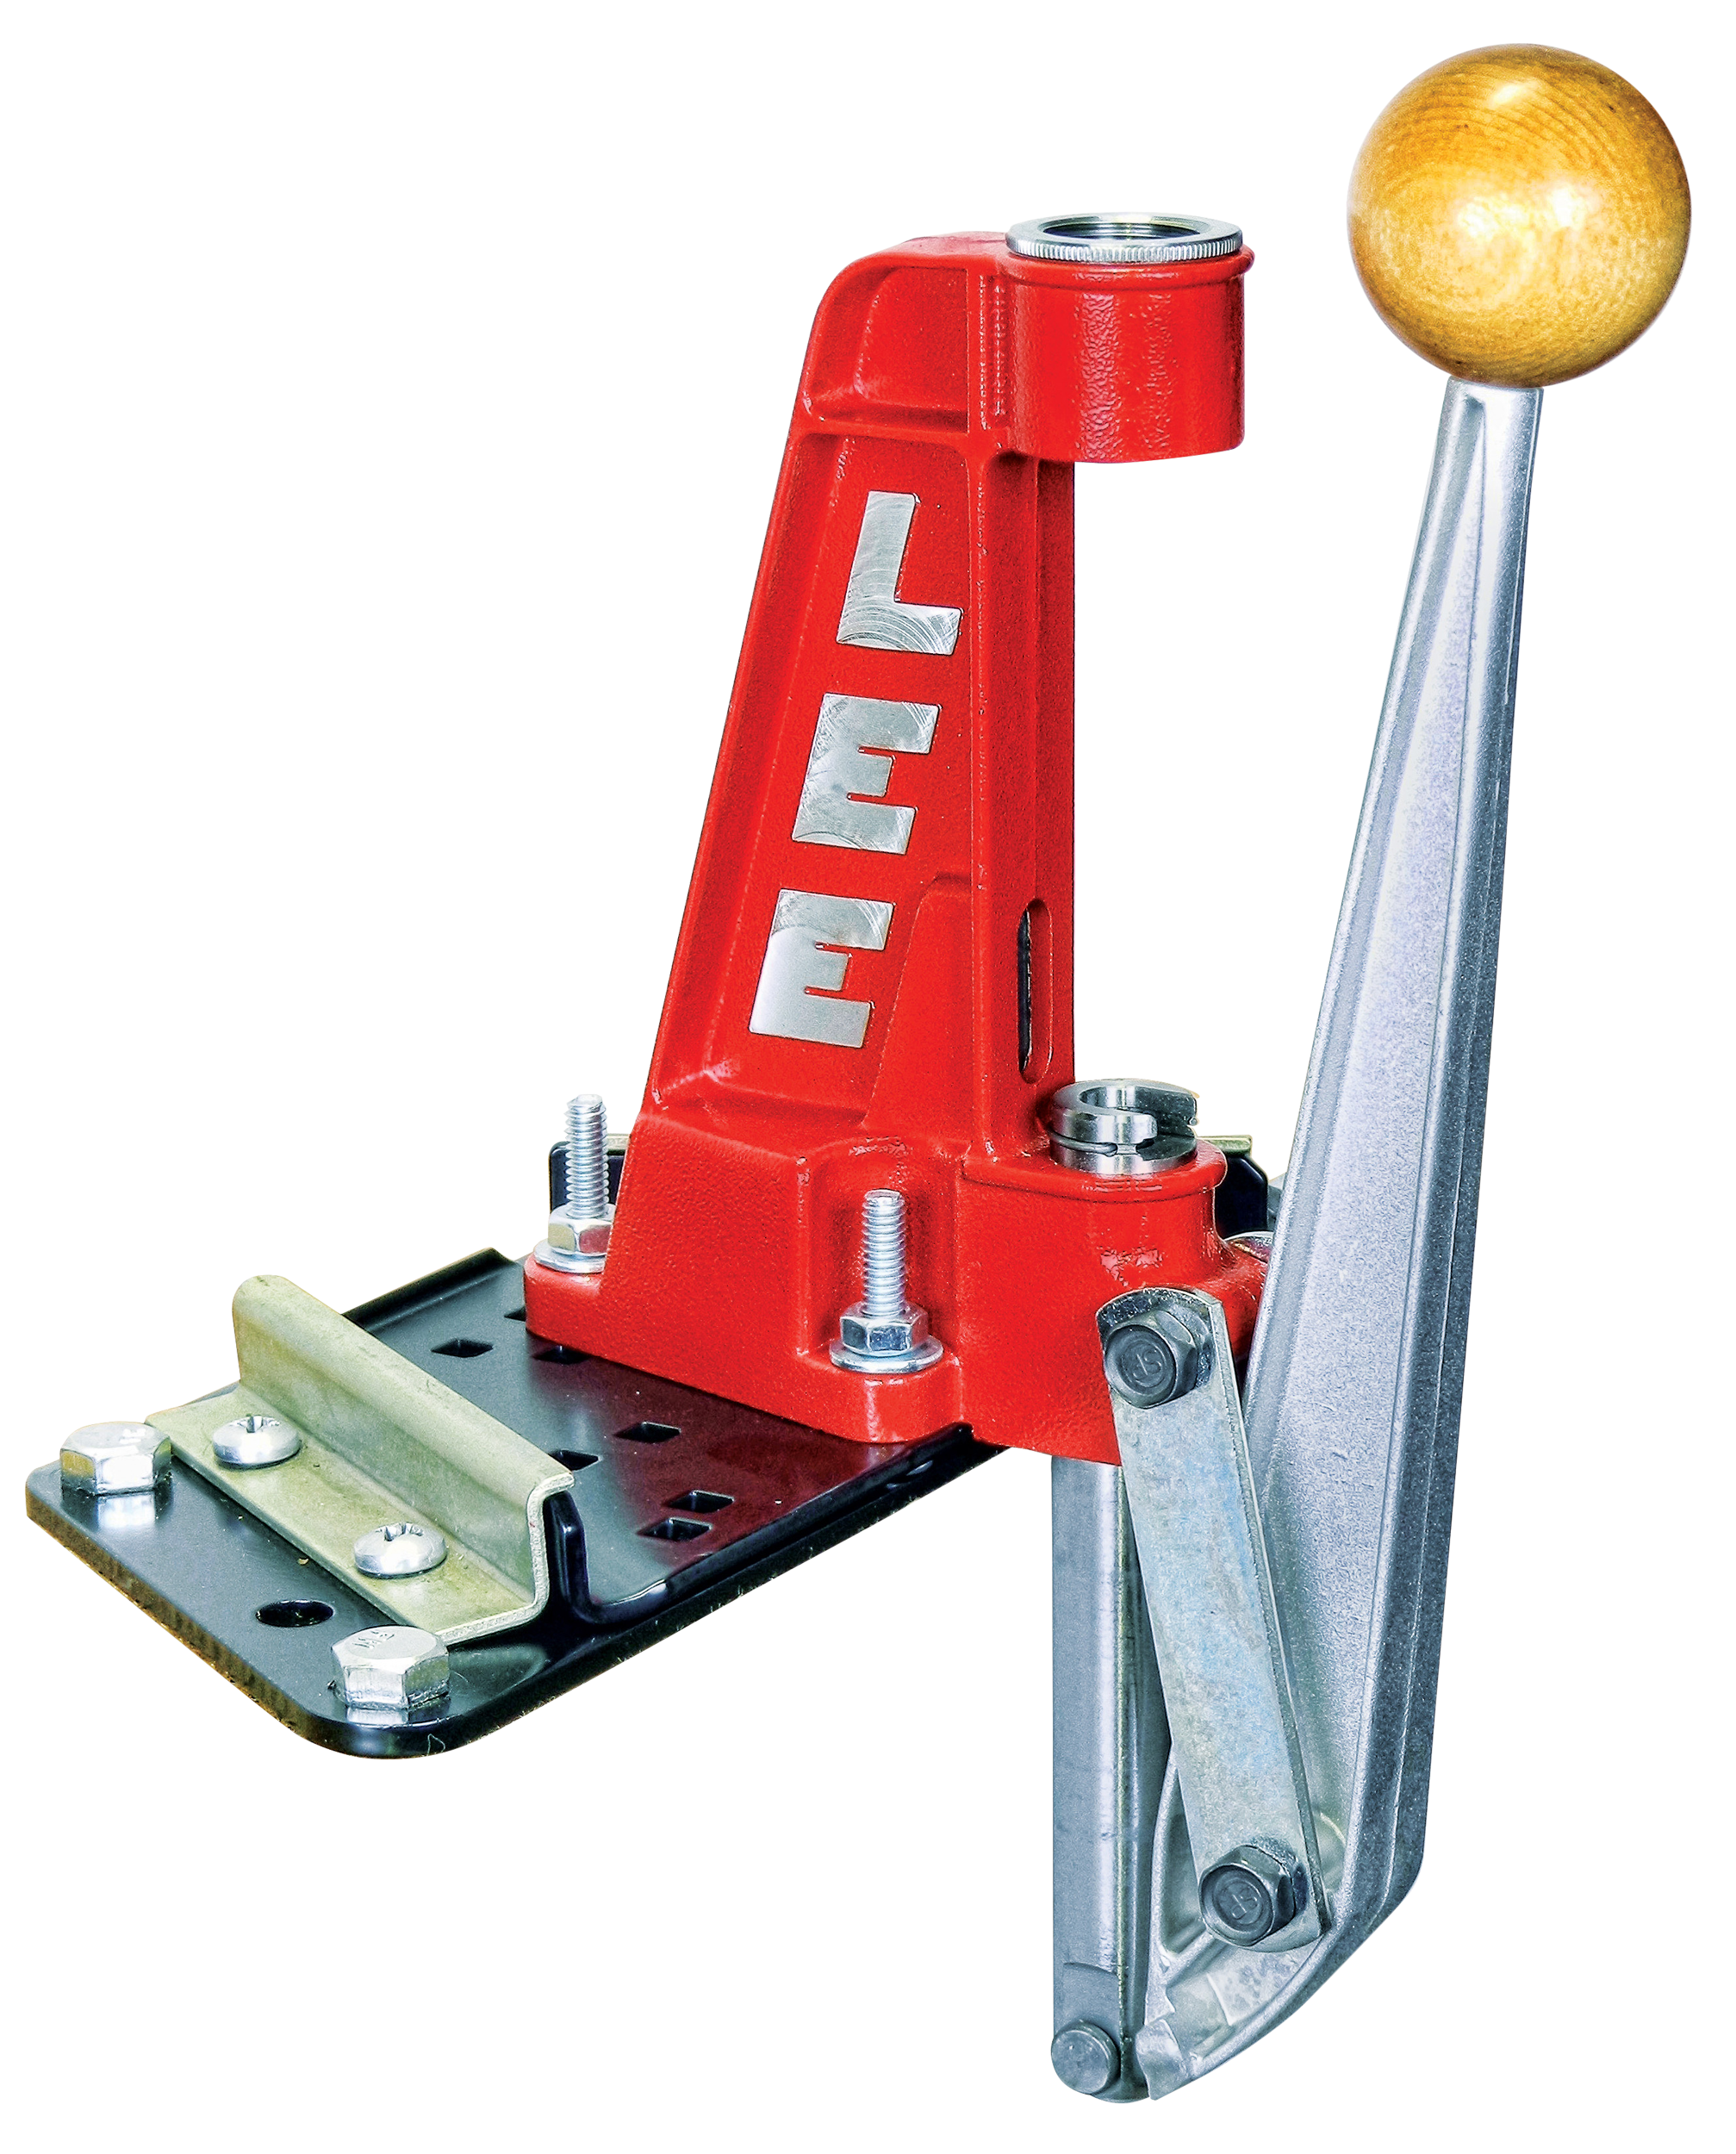 Lee Precision Six Pack Pro Reloading Press Steel Works With All Cases 91823